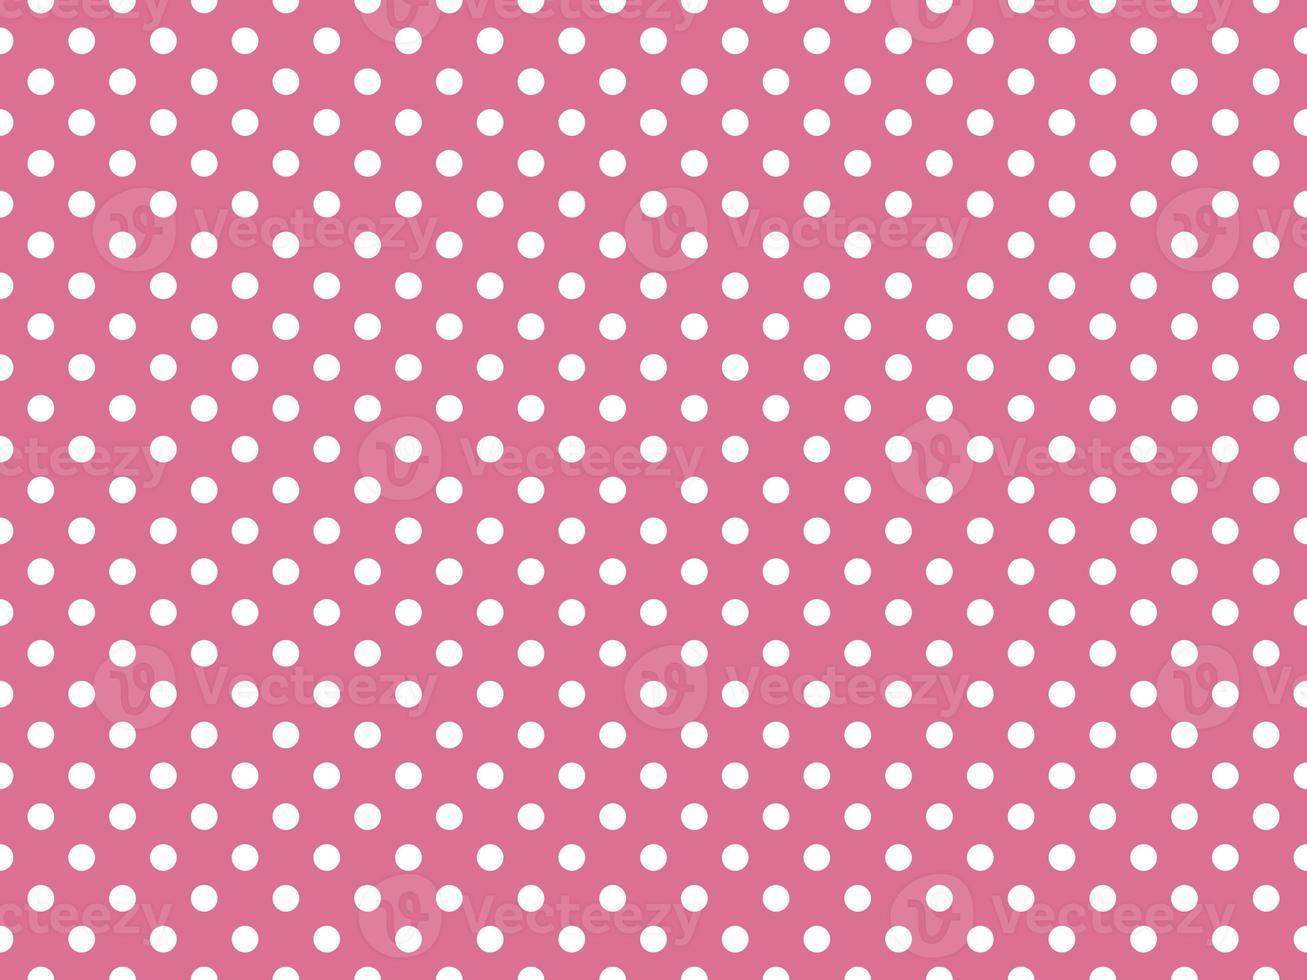 white polka dots over pale violet red background photo